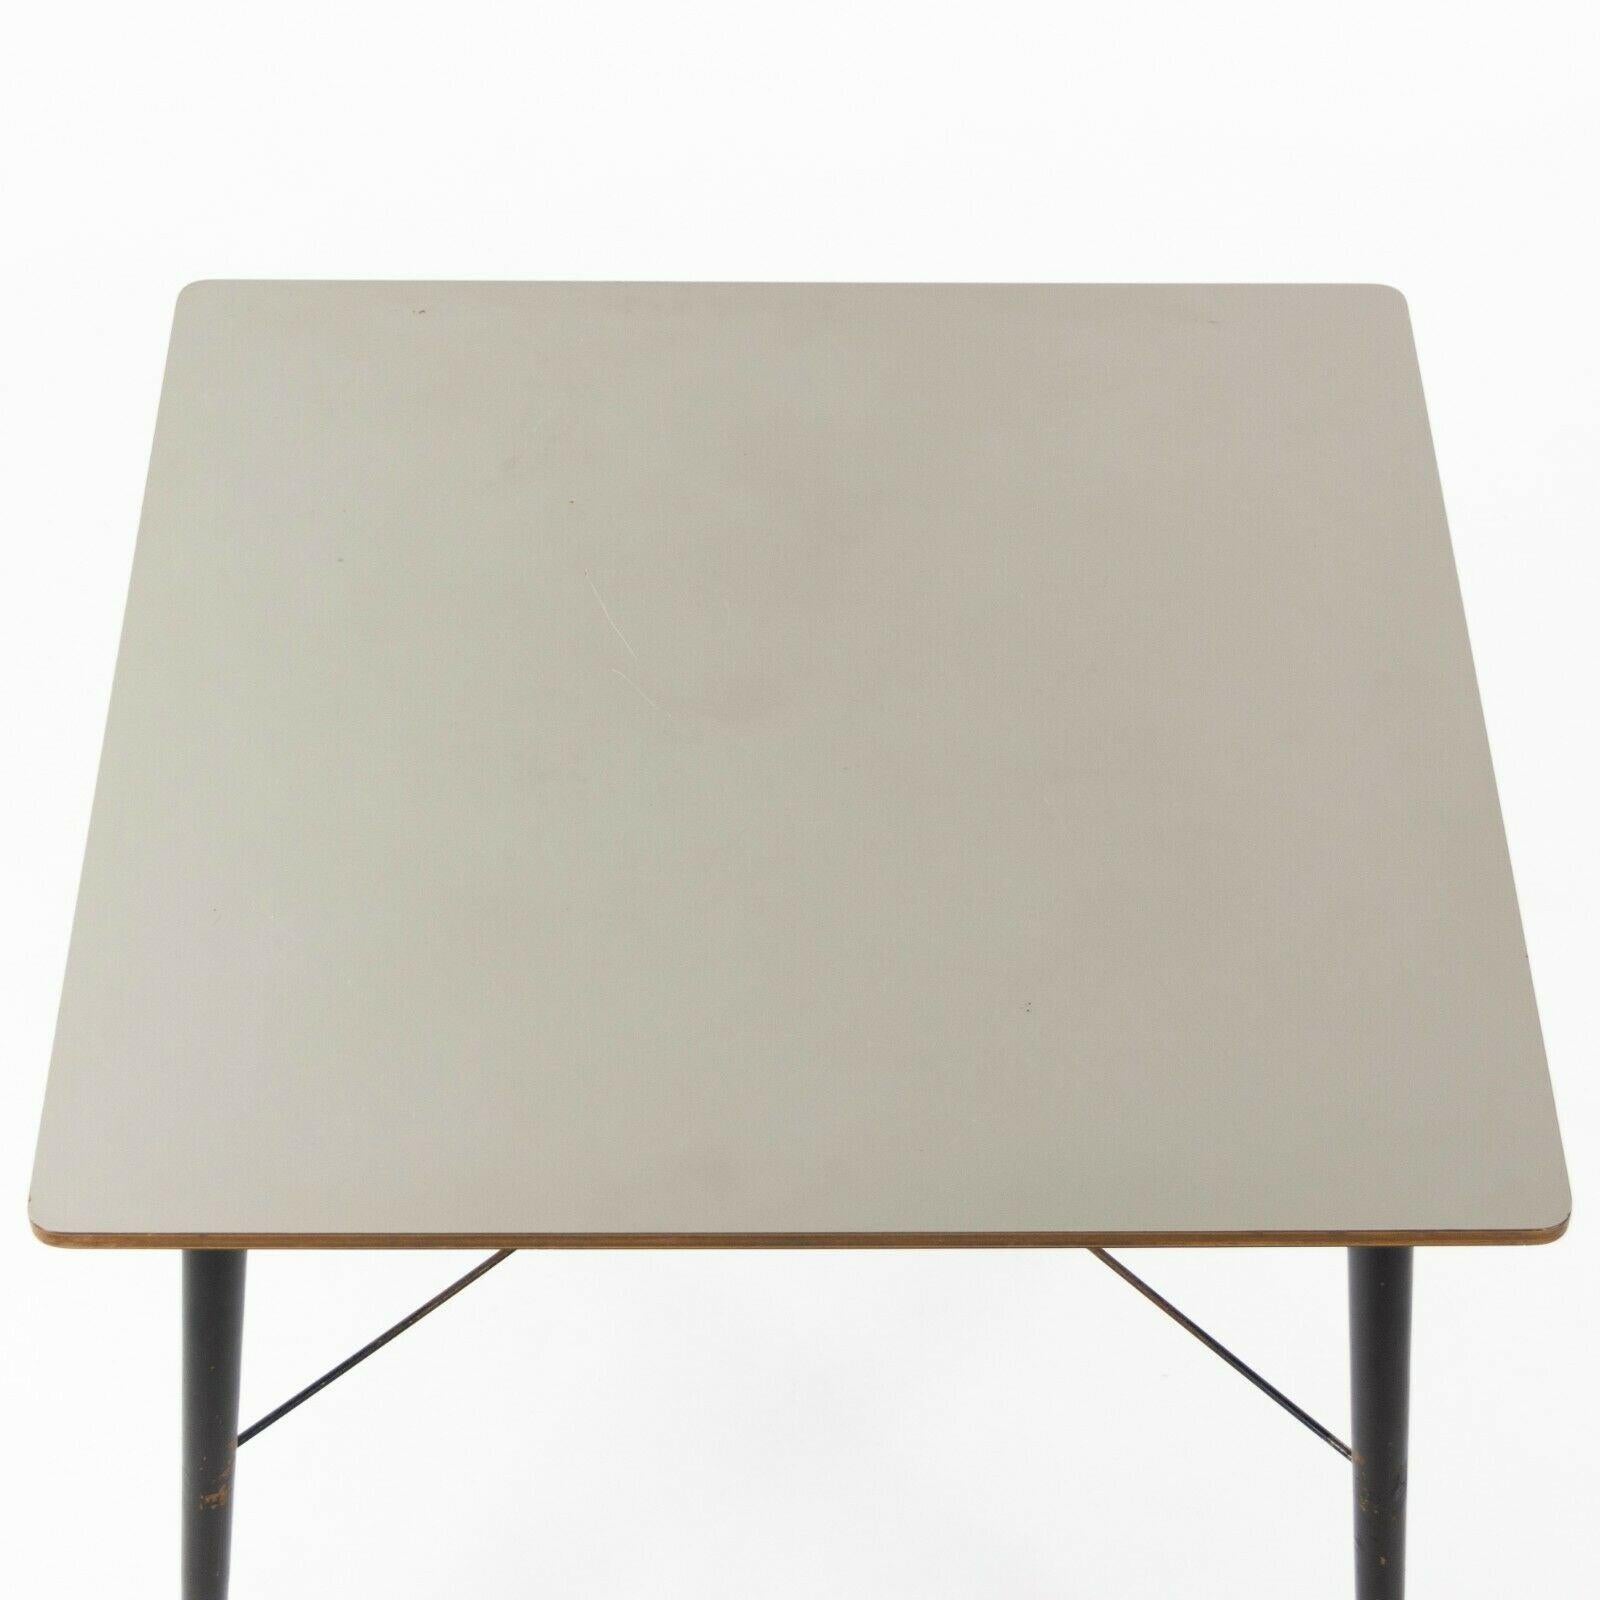 1954 Eames Herman Miller DTW 4 Dining Table White Laminate Top & Cross Brace For Sale 4